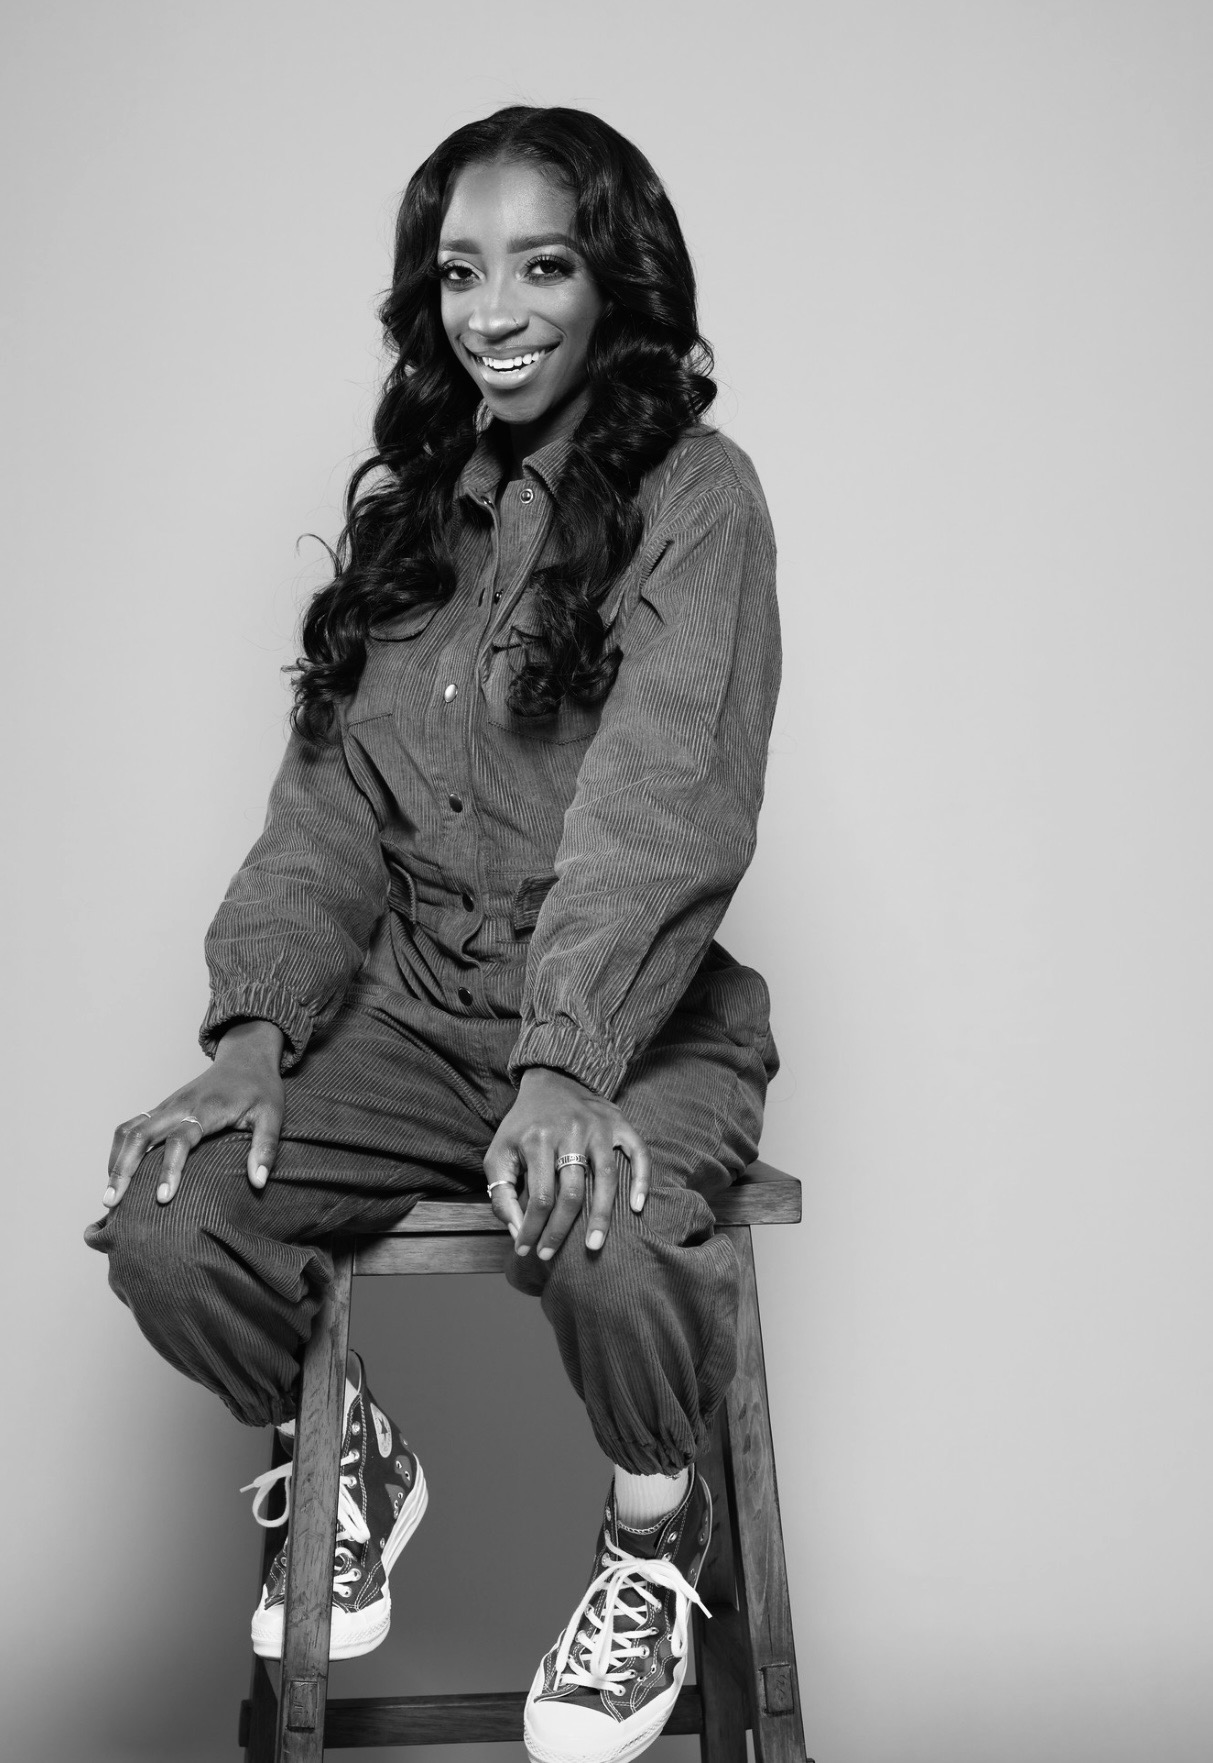 A black-and-white portrait of a woman with a dark skin tone and long, wavy hair. She is wearing a corduroy jumpsuit and is sitting on a wooden chair. 